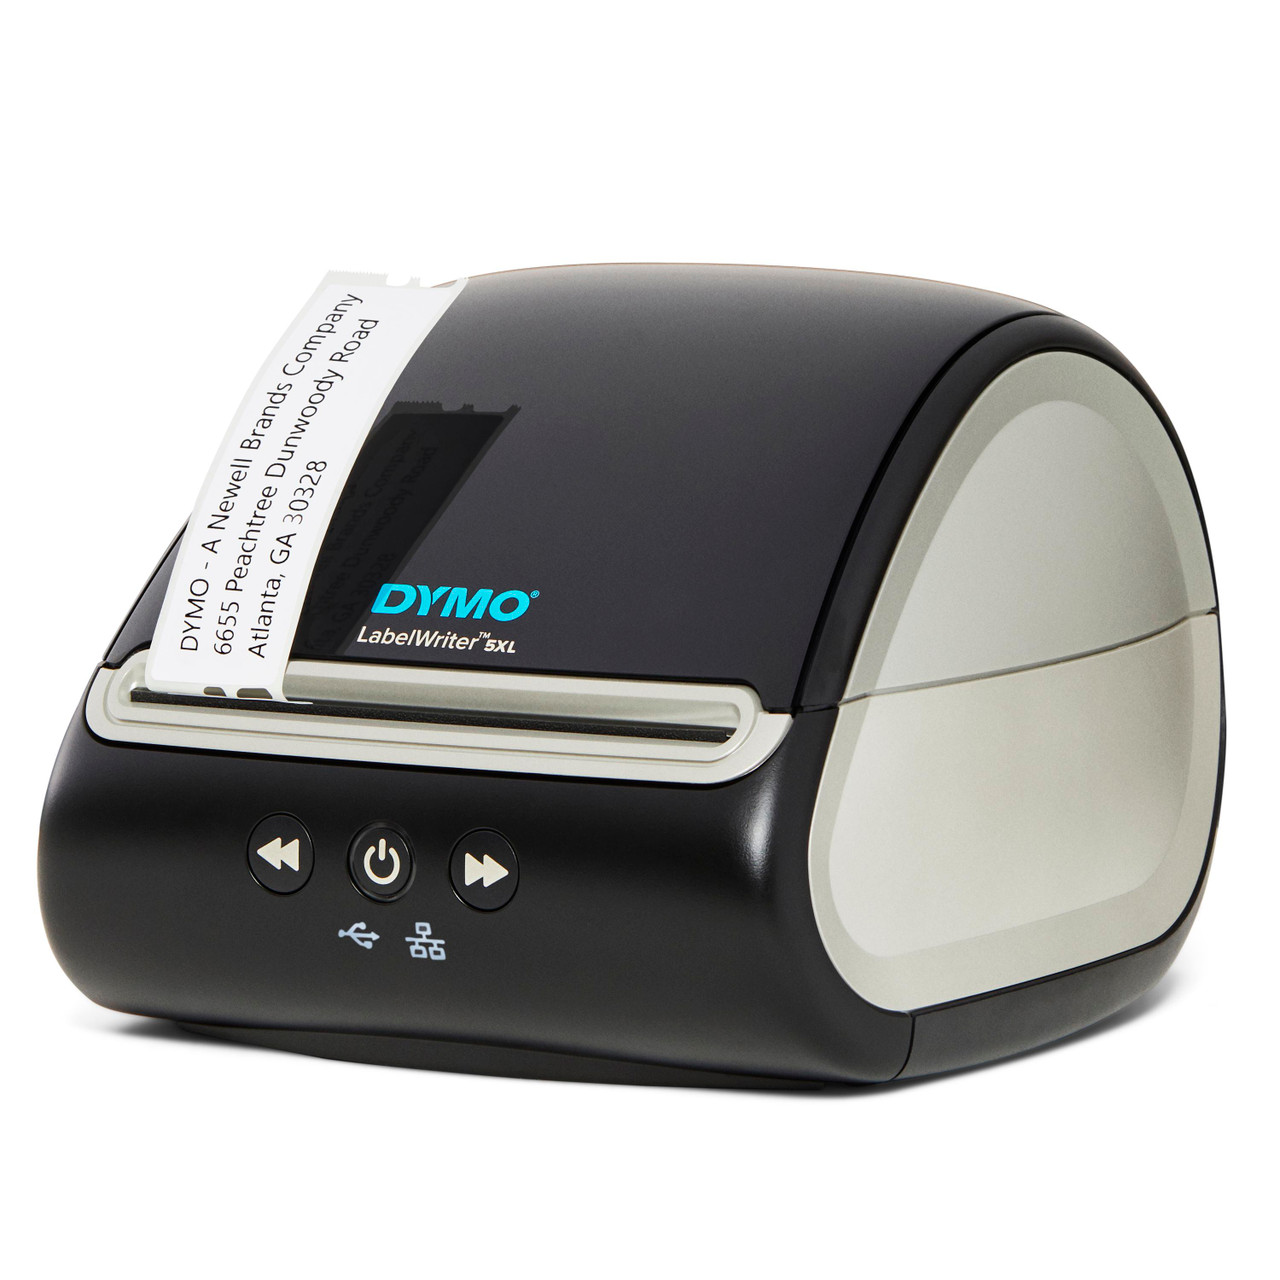 DYMO LabelWriter 5XL Direct Thermal Label Printer with USB and Ethernet Connectivity, Black Monochrome, 62 Labels Per Minute, 300 dpi, x - 1